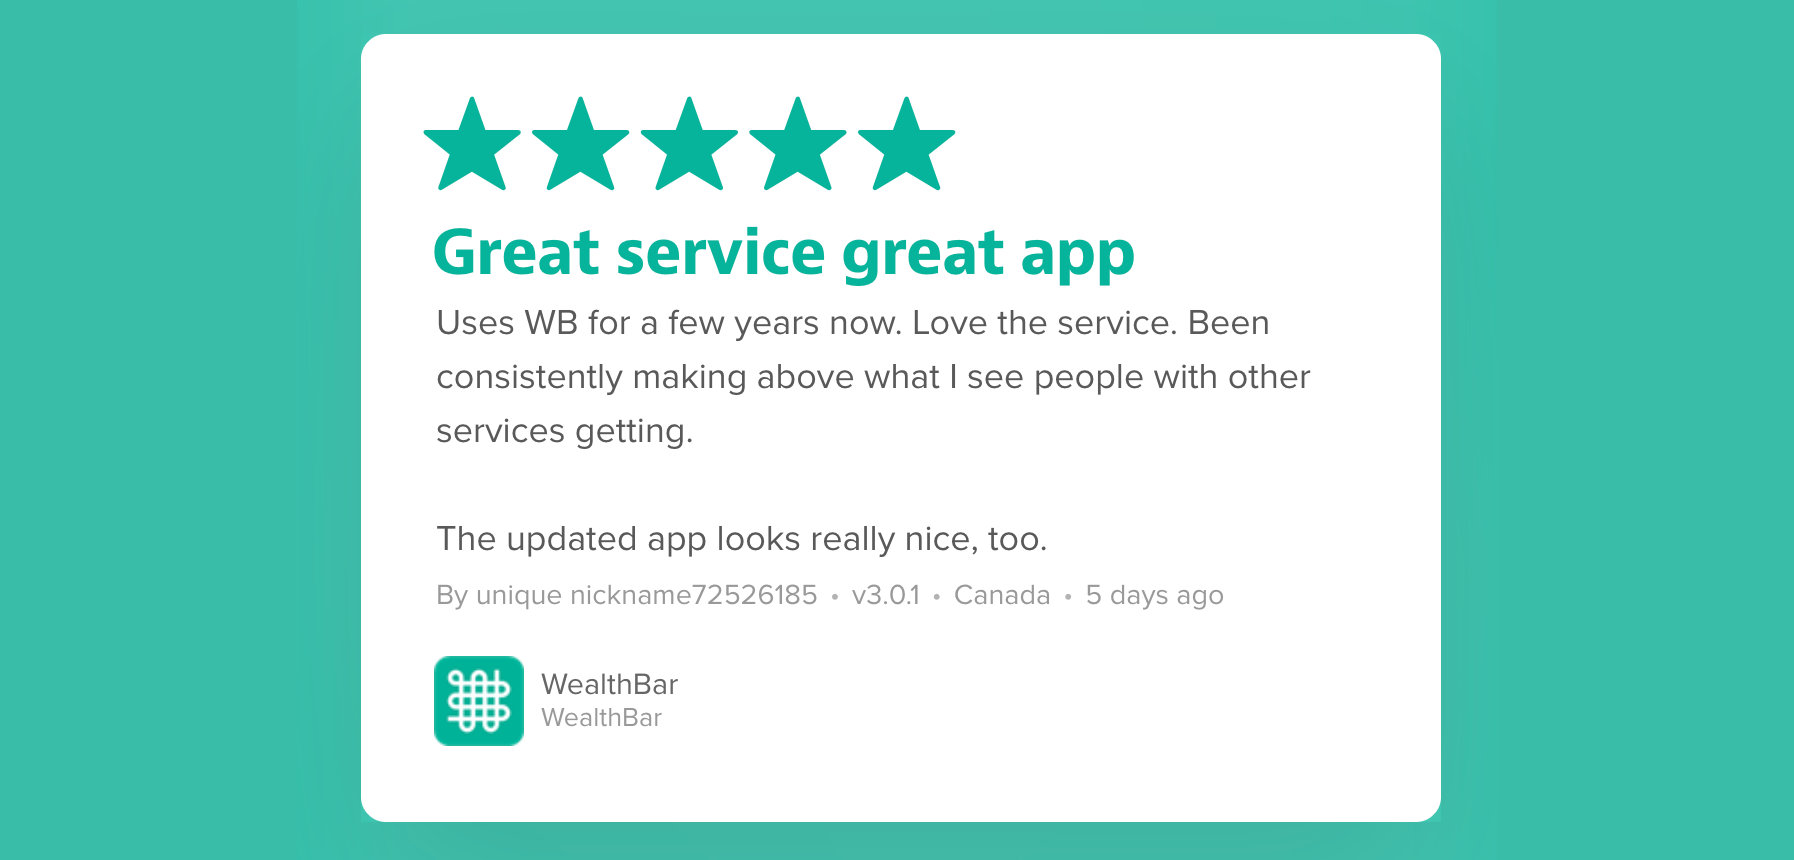 WeathBar review with 5 stars reading 'great service great app. Been consistently using WB for a few years now. Love the service. Been consistenly making above what I see people with other services getting. The updated app looks really nice too.' by uniquenickname72526185